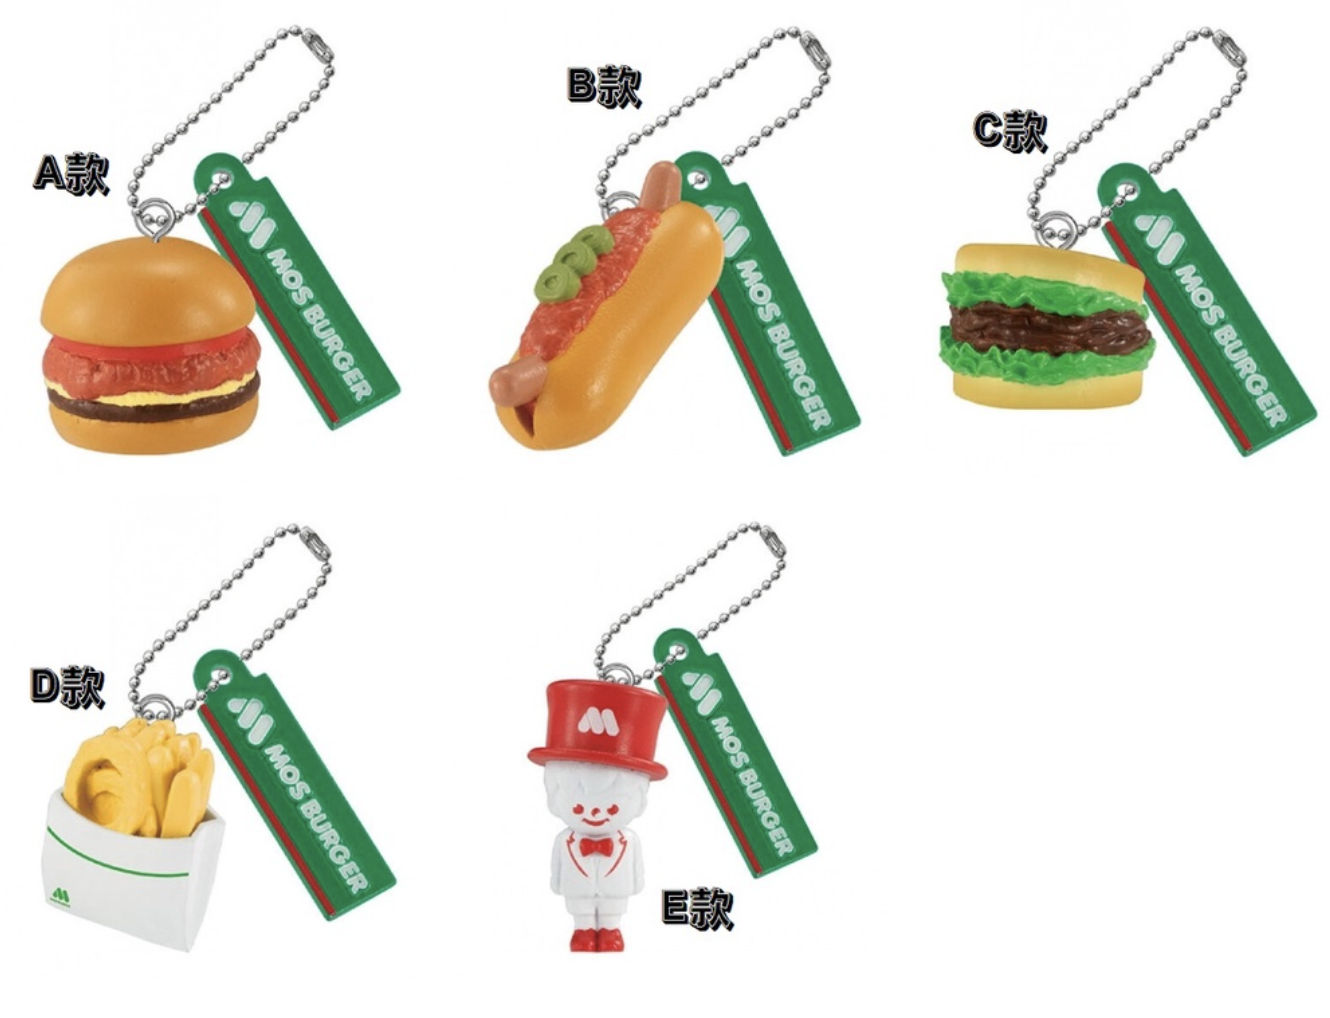 unofficial fast food merch - mos burger keychains